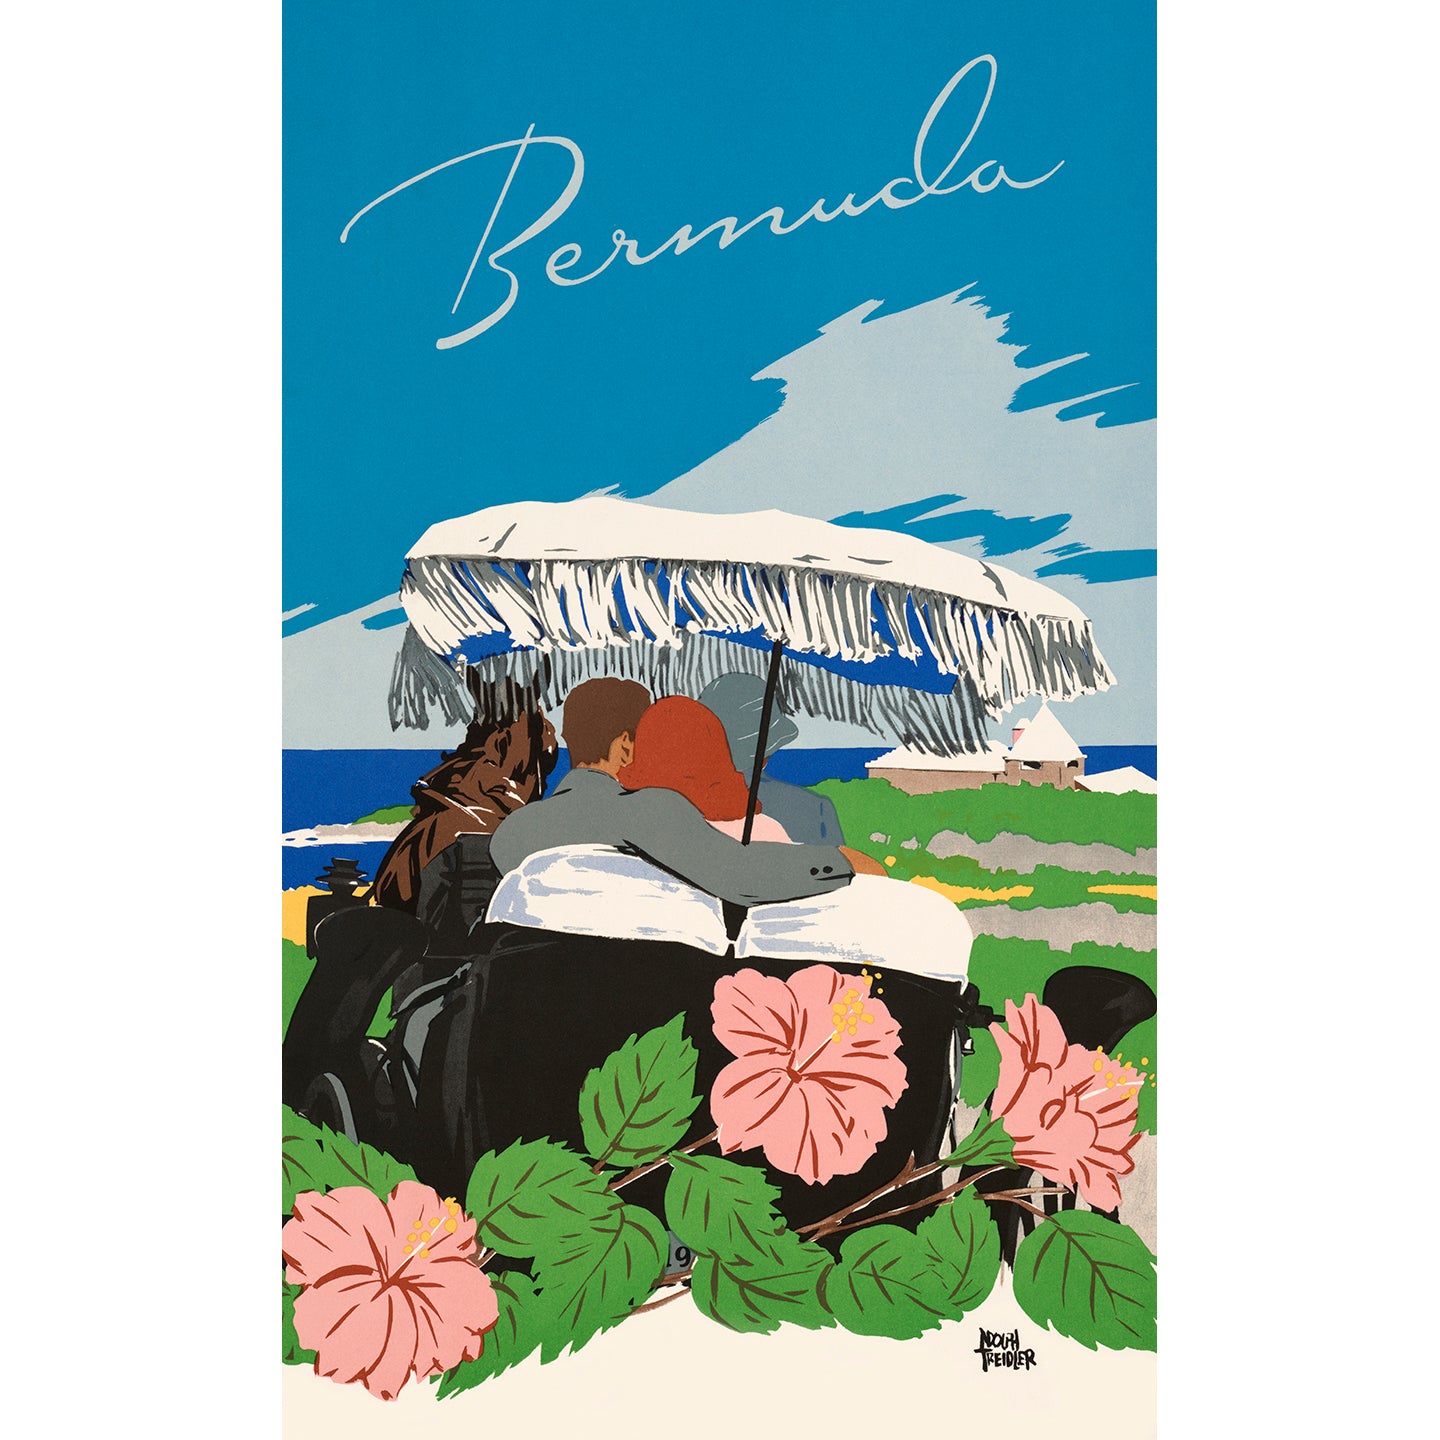 Bermuda travel poster featuring couple in a carriage